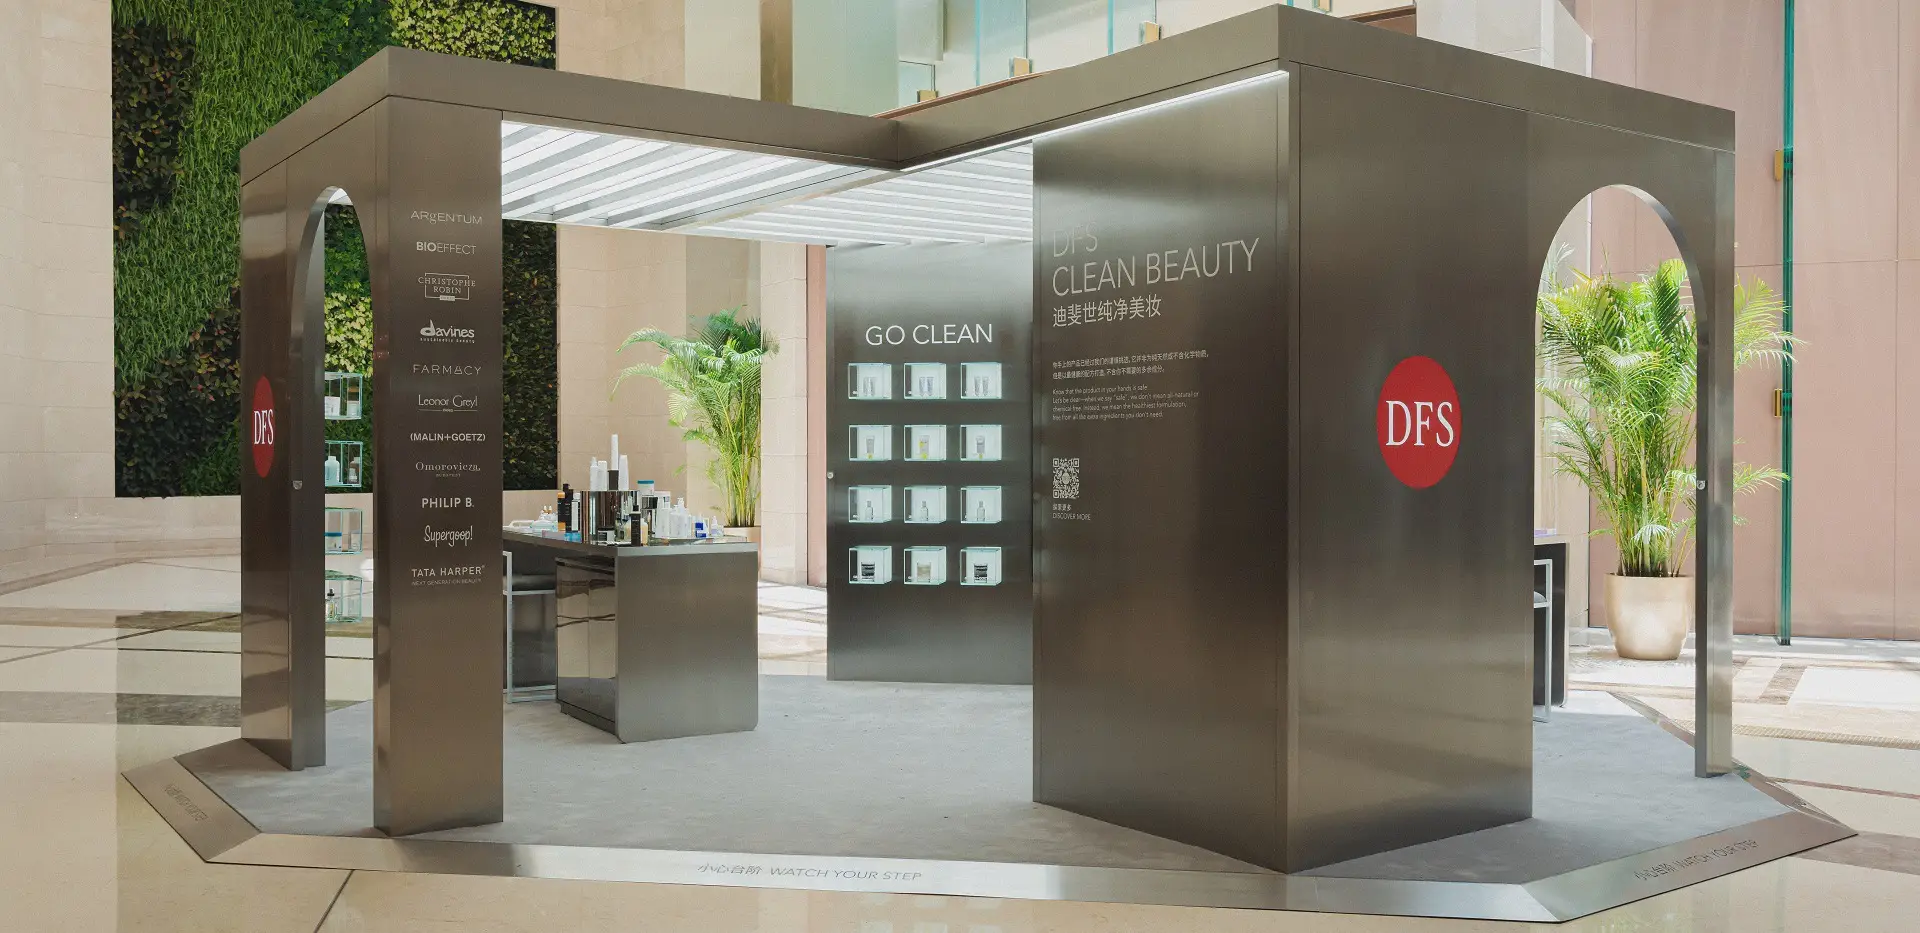 DFS Clean Beauty Pop-Up, Only at Galaxy Macau